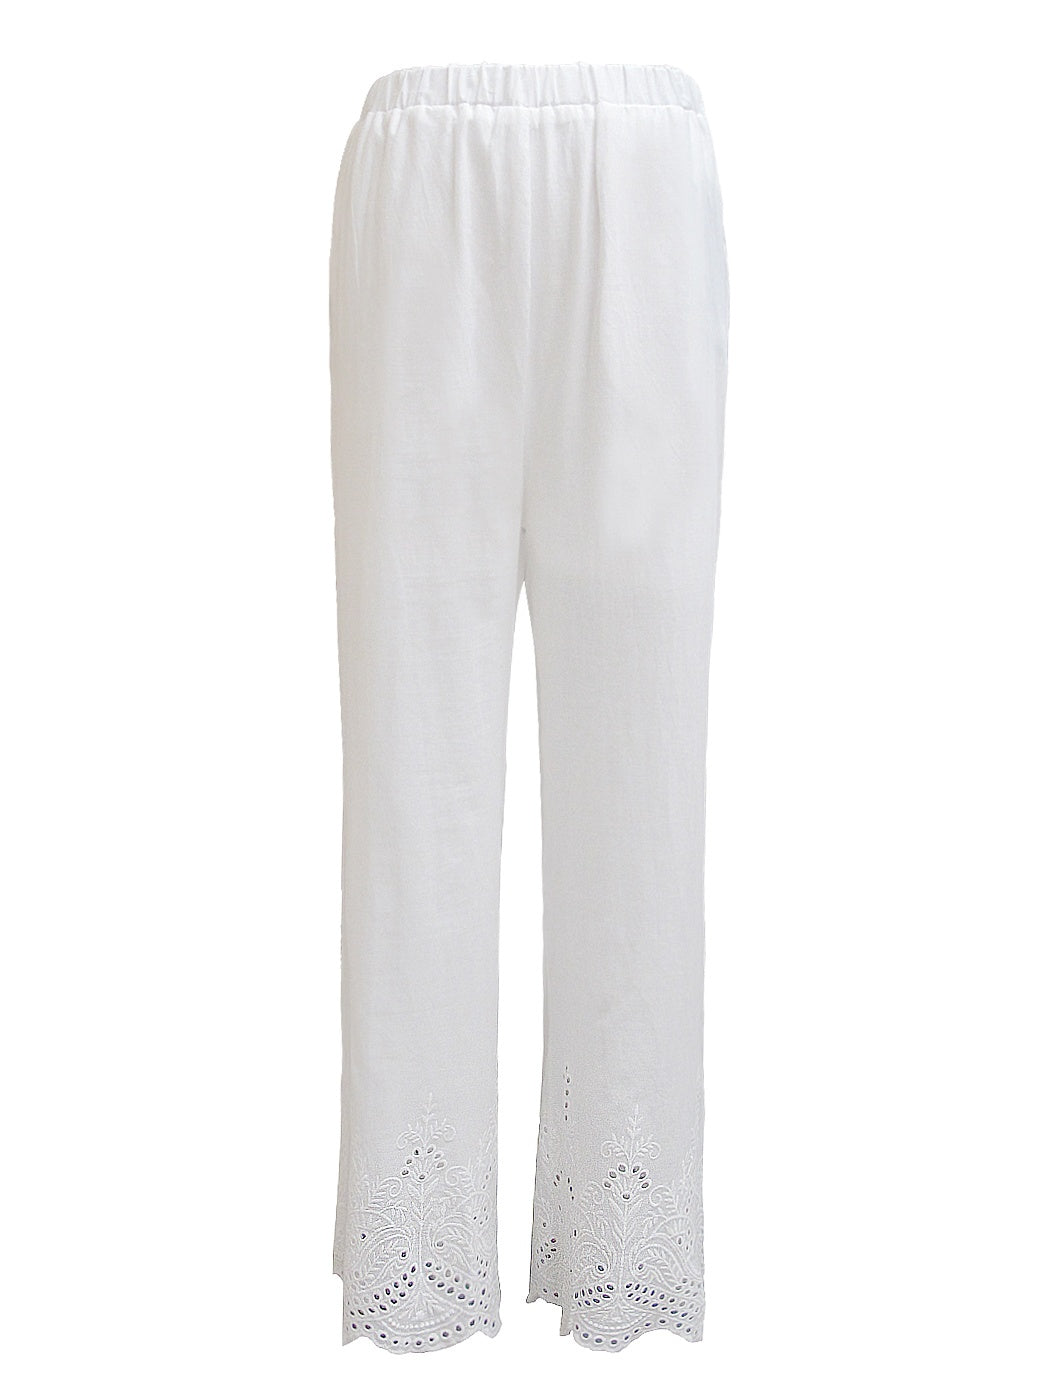 Womens Elastic Waist Loose Fit Casual Cotton Straight Leg Lounge Pants, White, Small